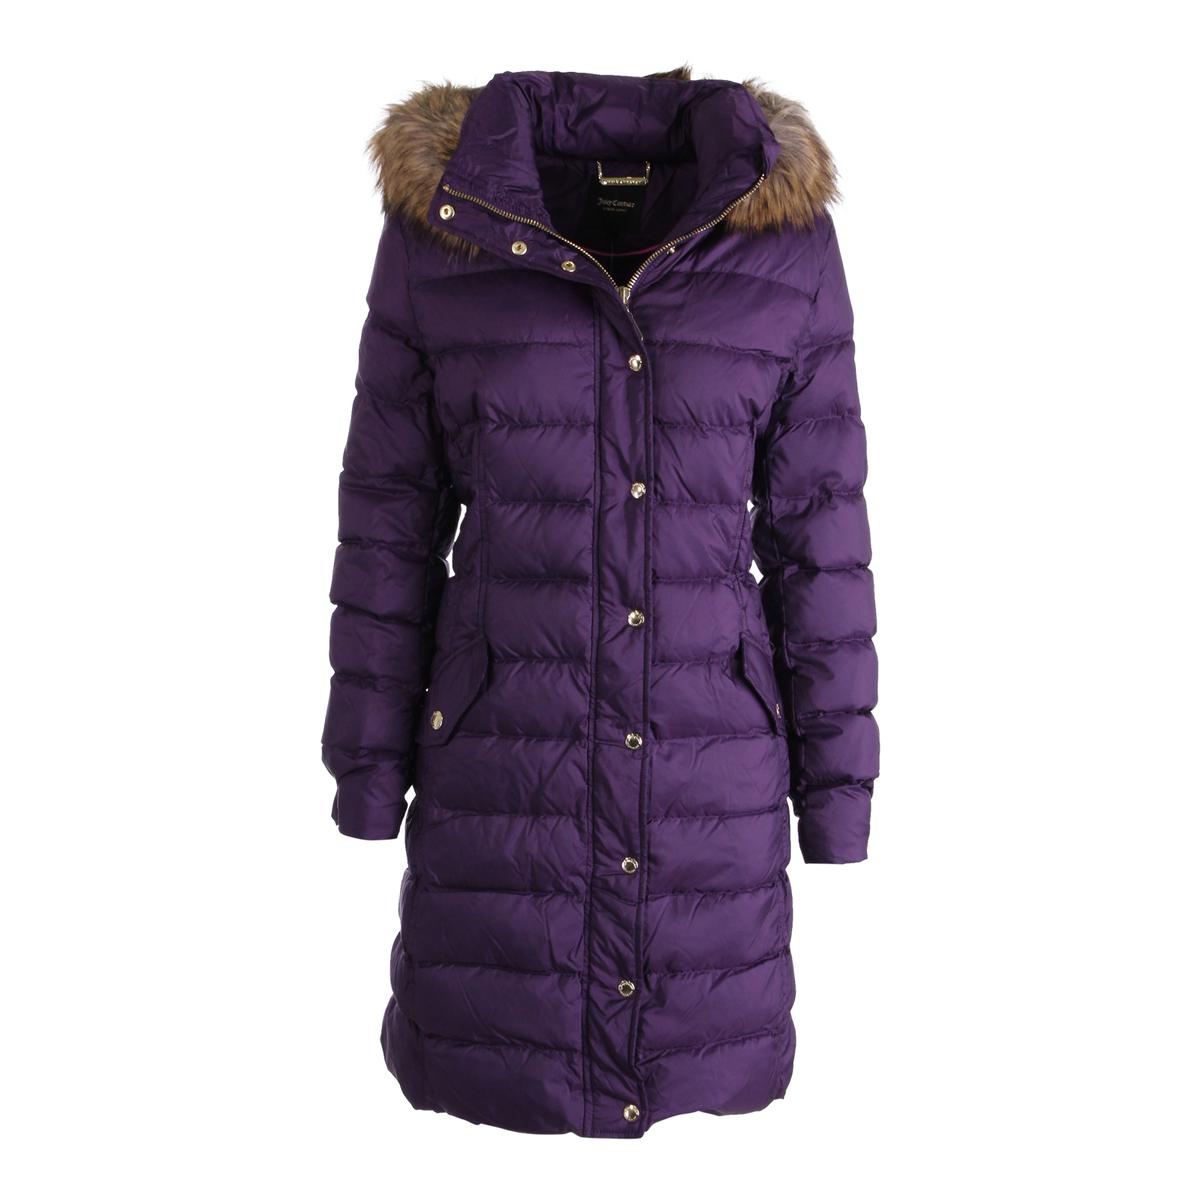 Juicy Couture Black Label 3042 Womens Quilted Long Puffer Coat BHFO | eBay